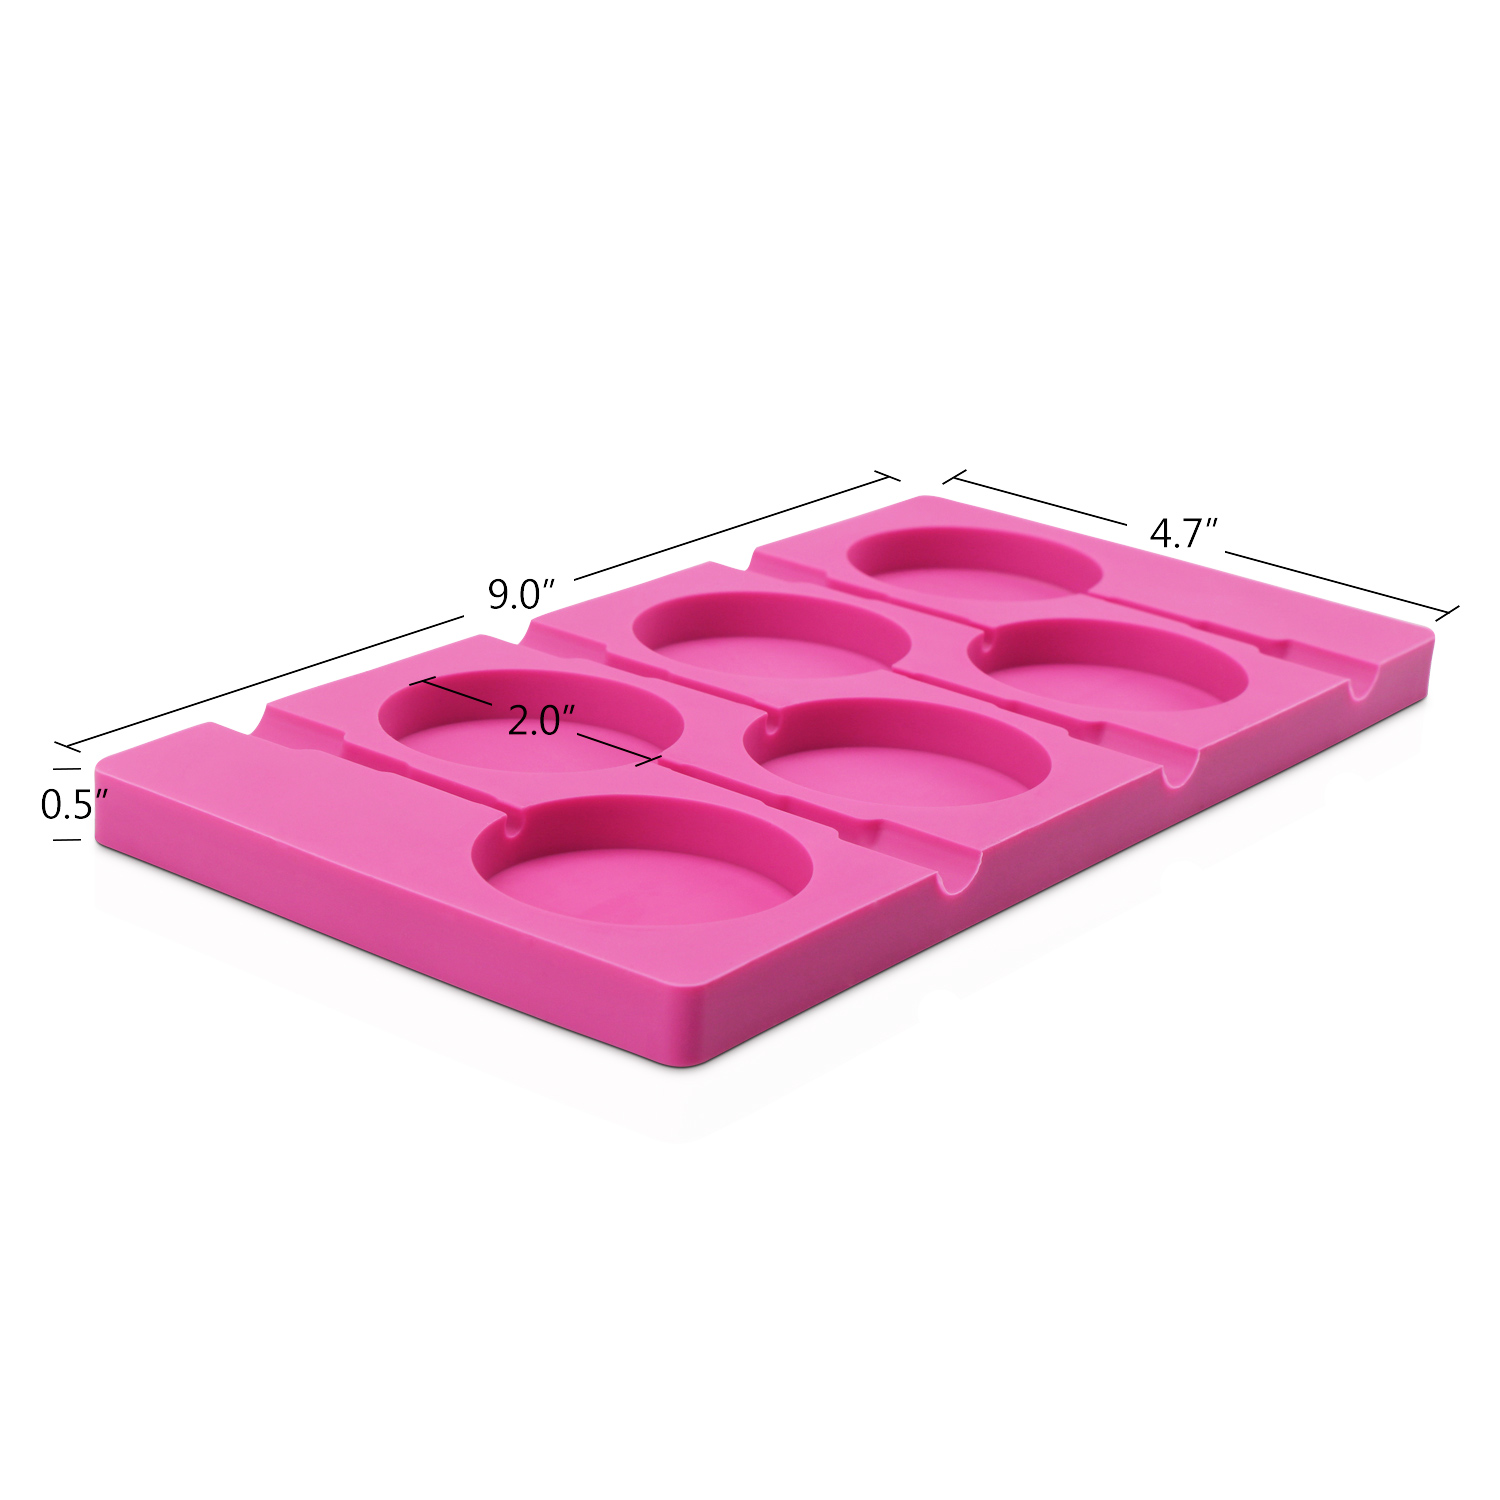 Silicone Ice Cube Trays, Reusable Chocolate Molds Candy Molds, Silicone  Baking Mold for Cake Decoration Soap Crayons